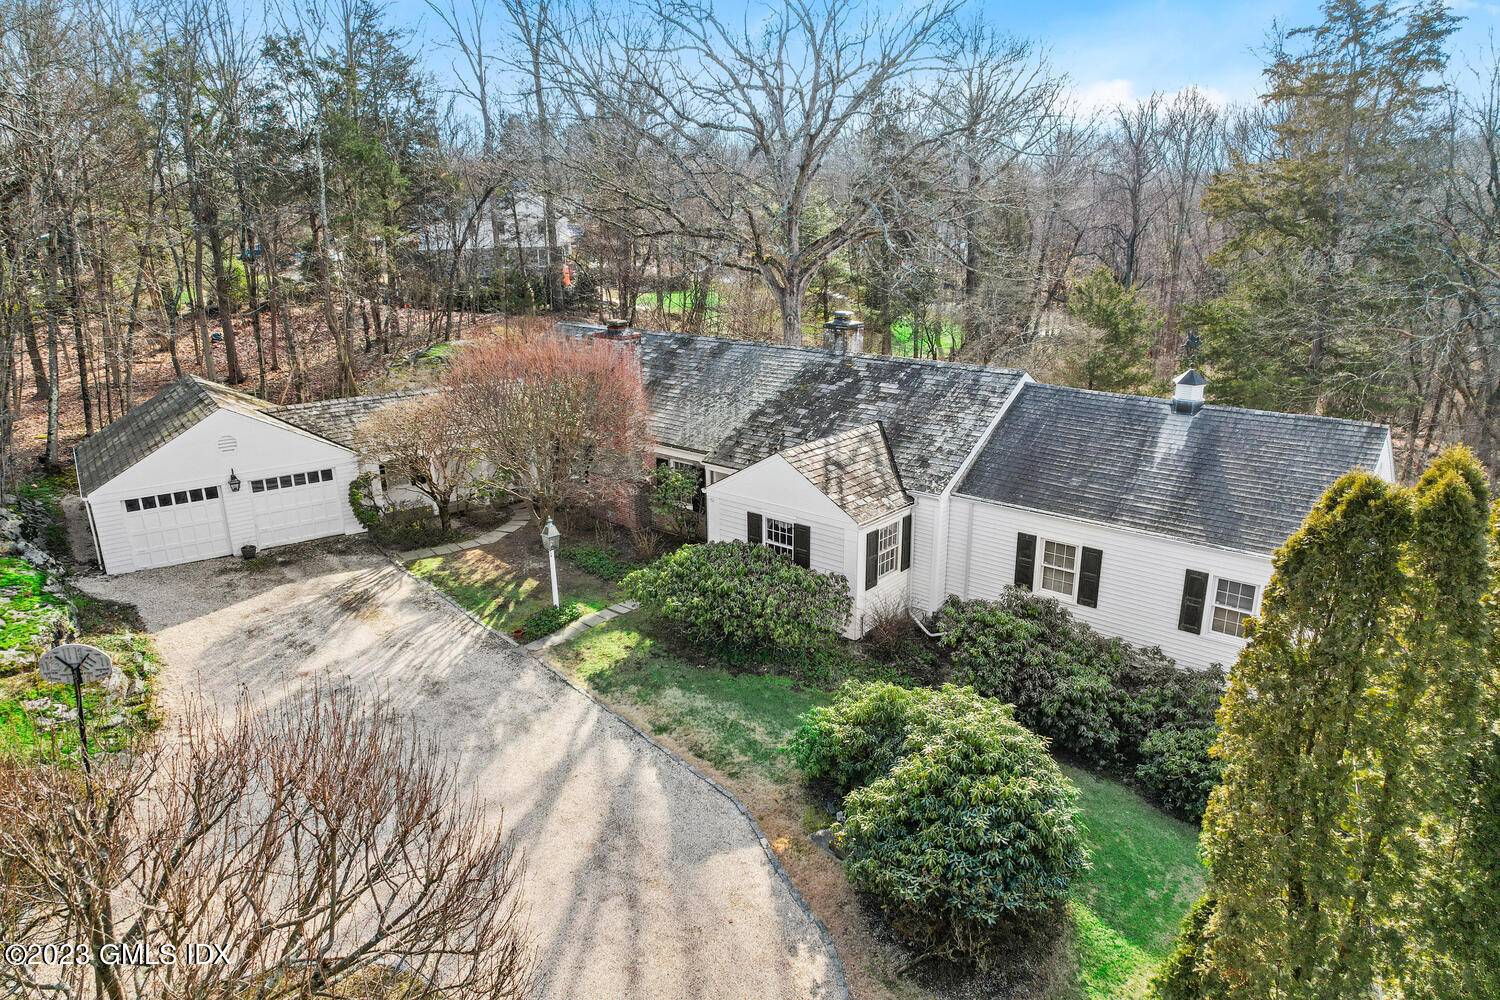 Private, 3, 787 sf home on 2 acres in north Cos Cob with two flat lawn areas bordered by historic stone walls.